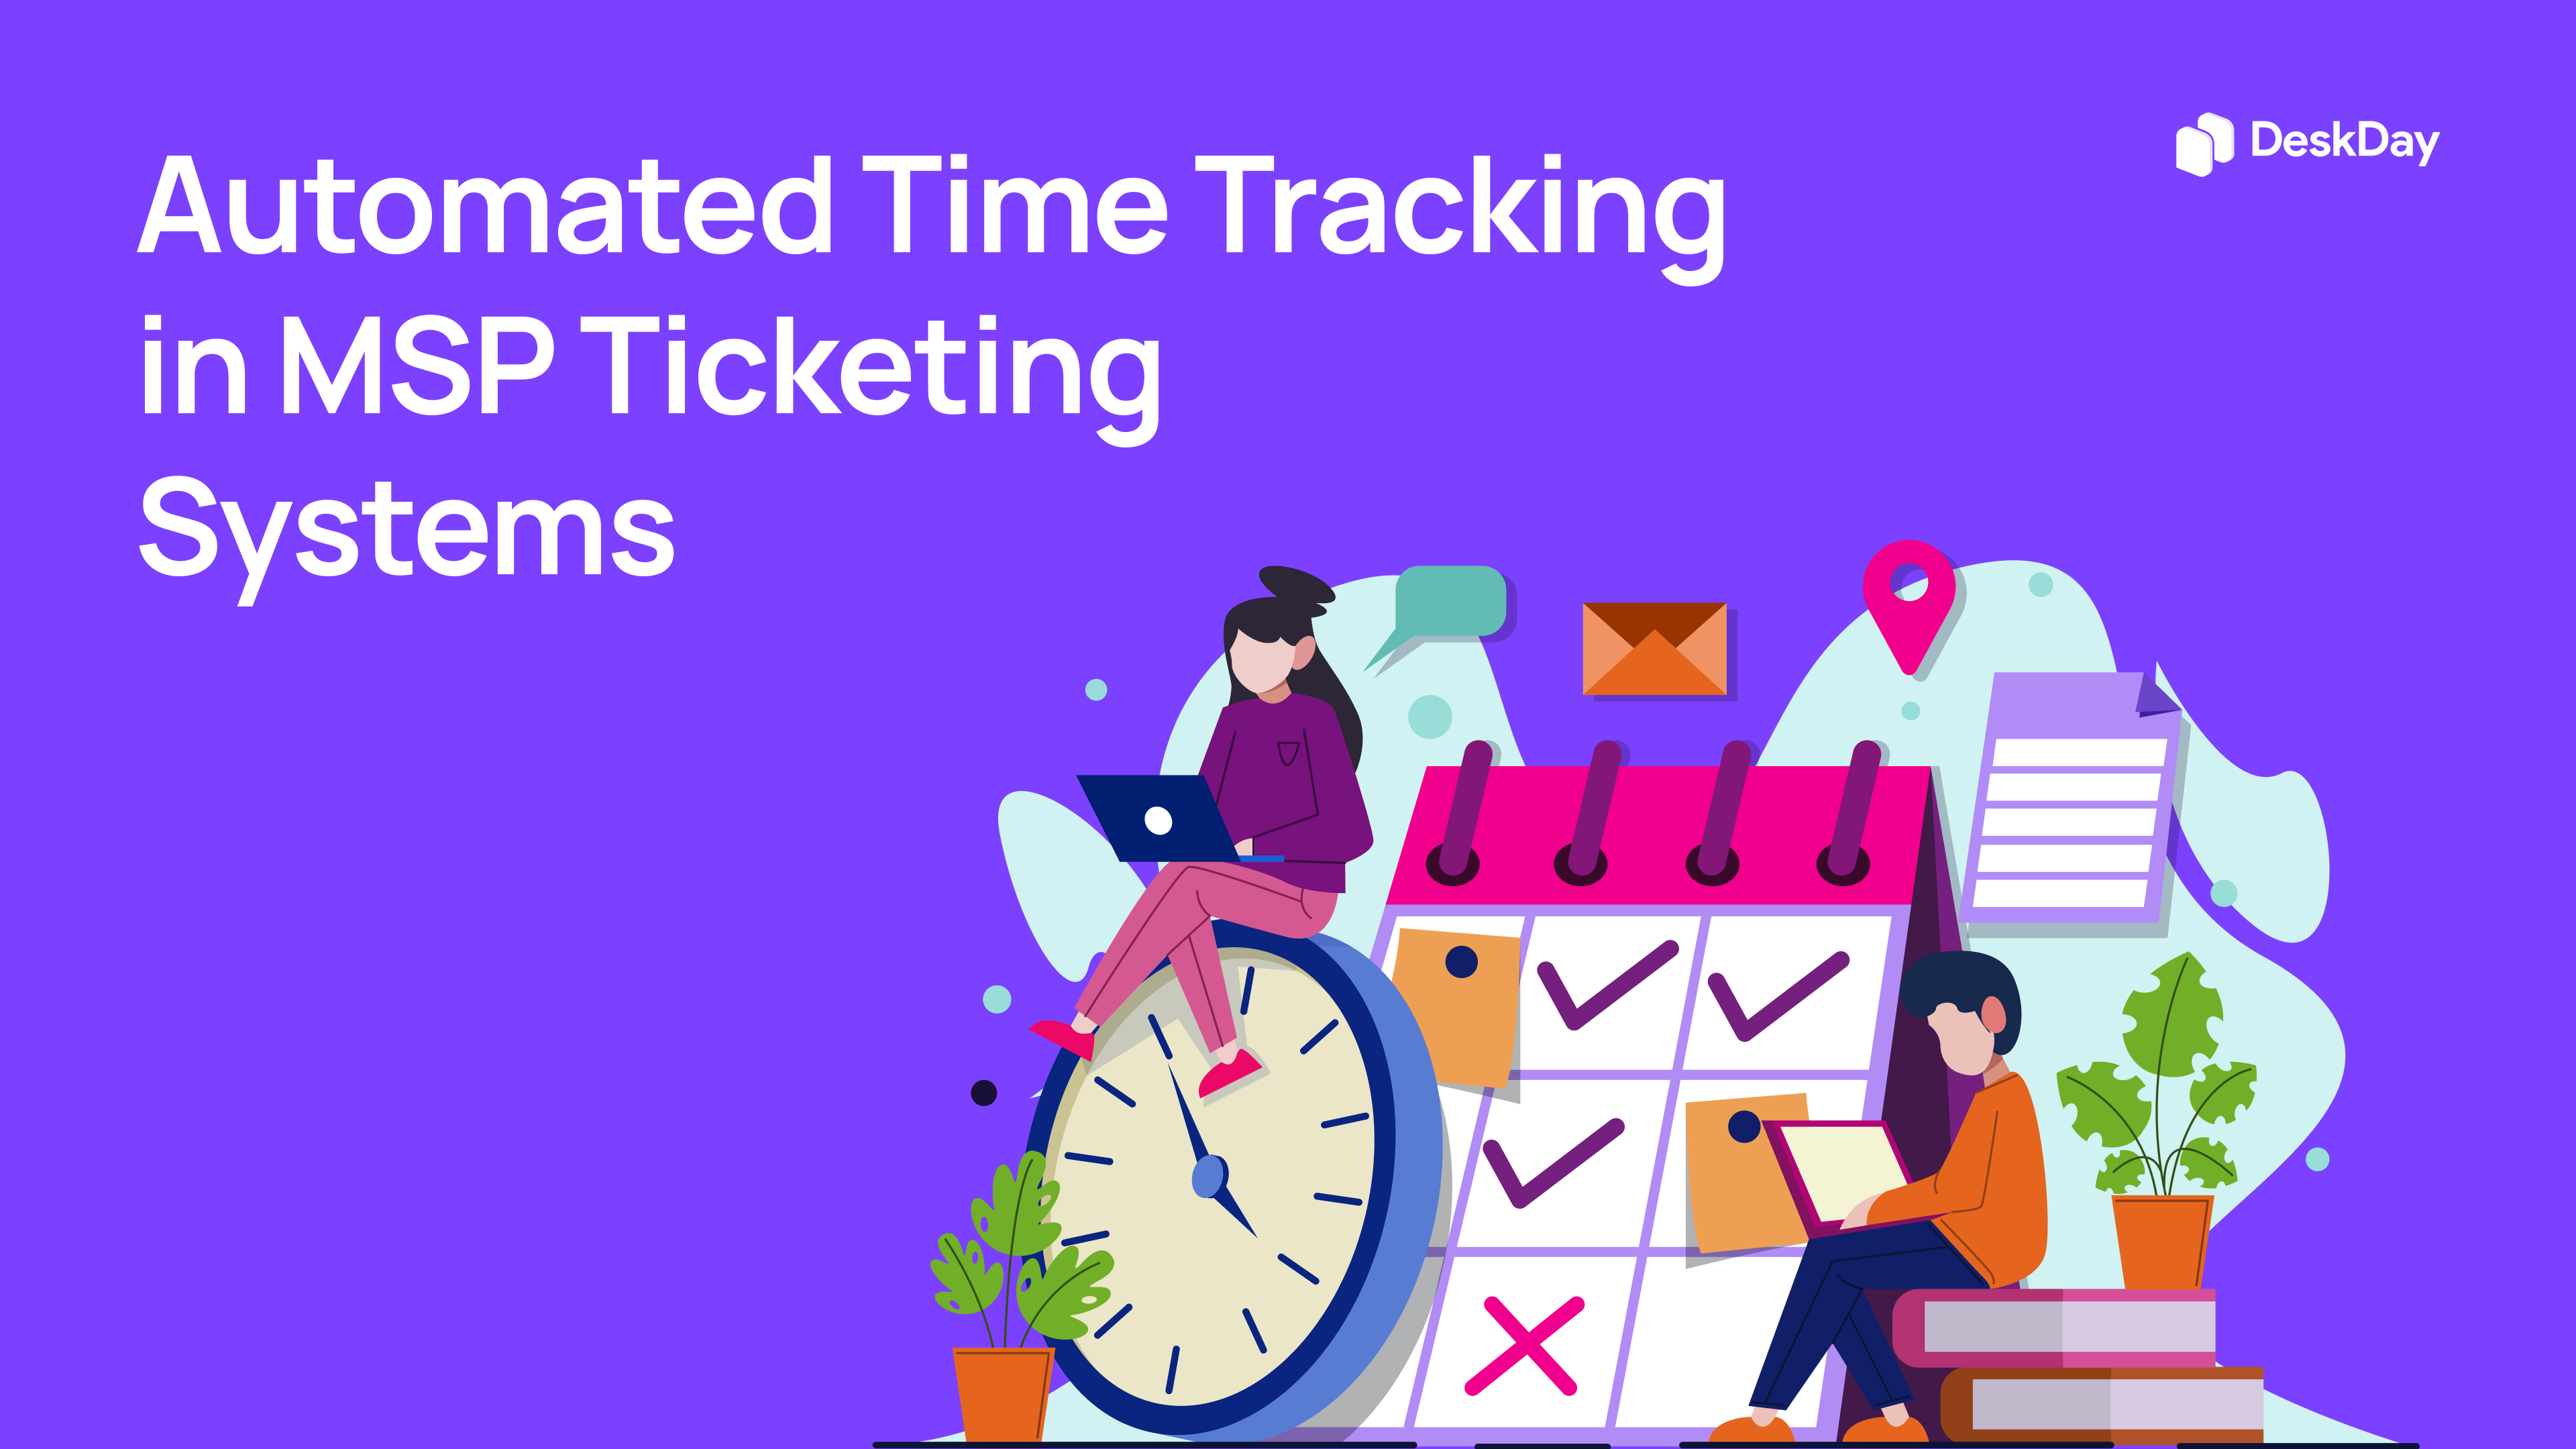 Necessity of Integrating Automated Time Tracking in MSP Ticketing Systems